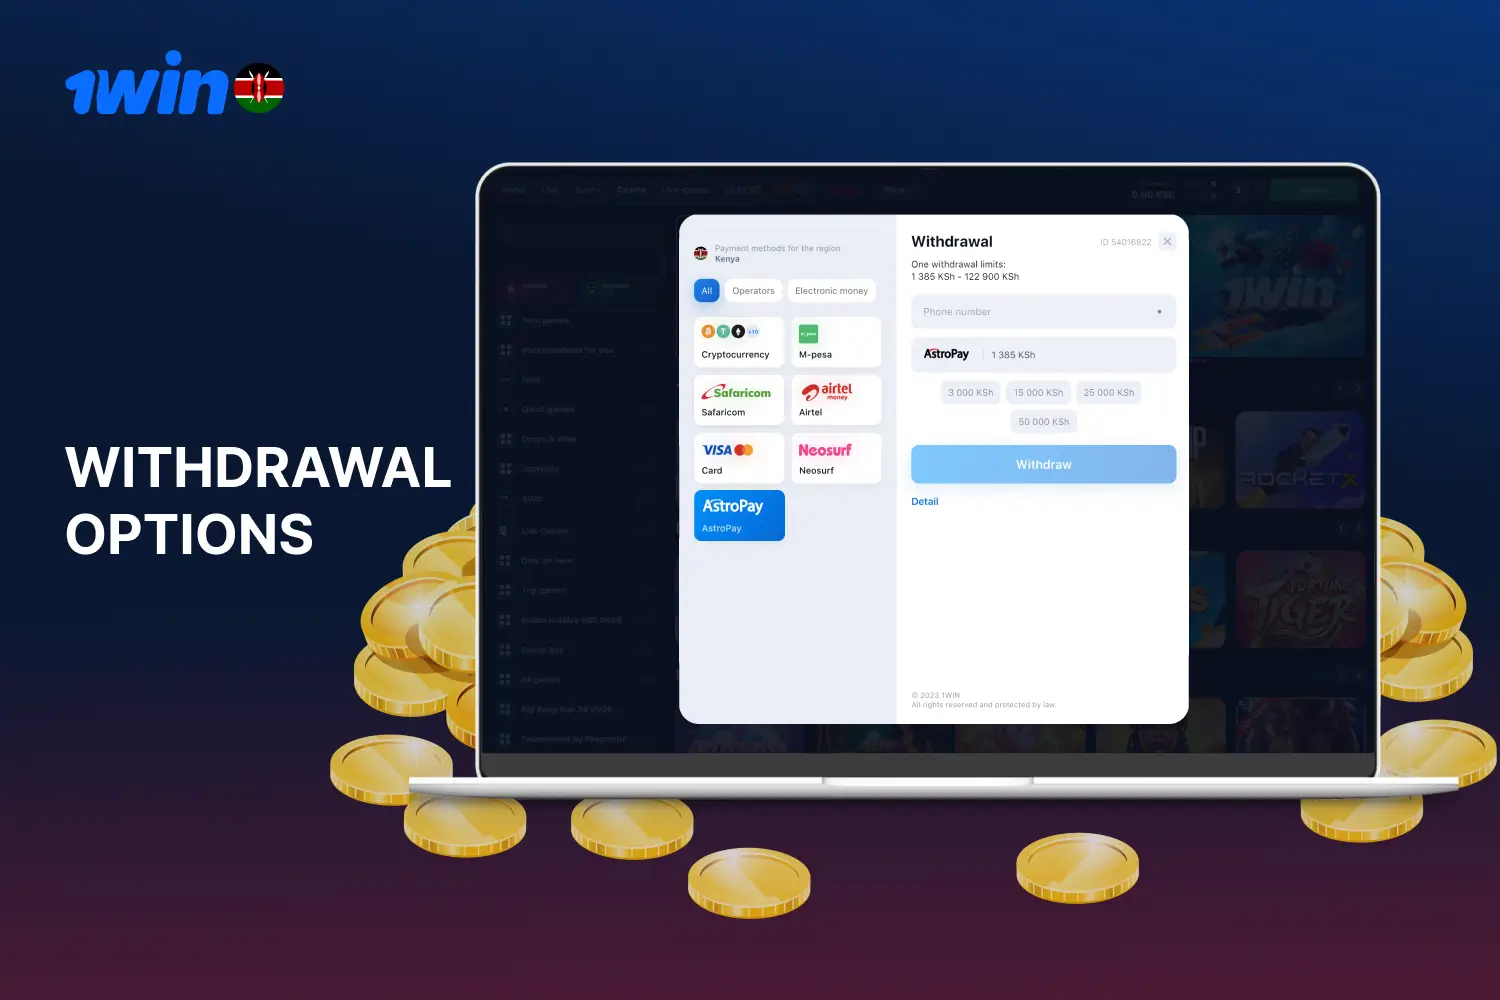 1win provides various withdrawal options for the convenience of users in Kenya